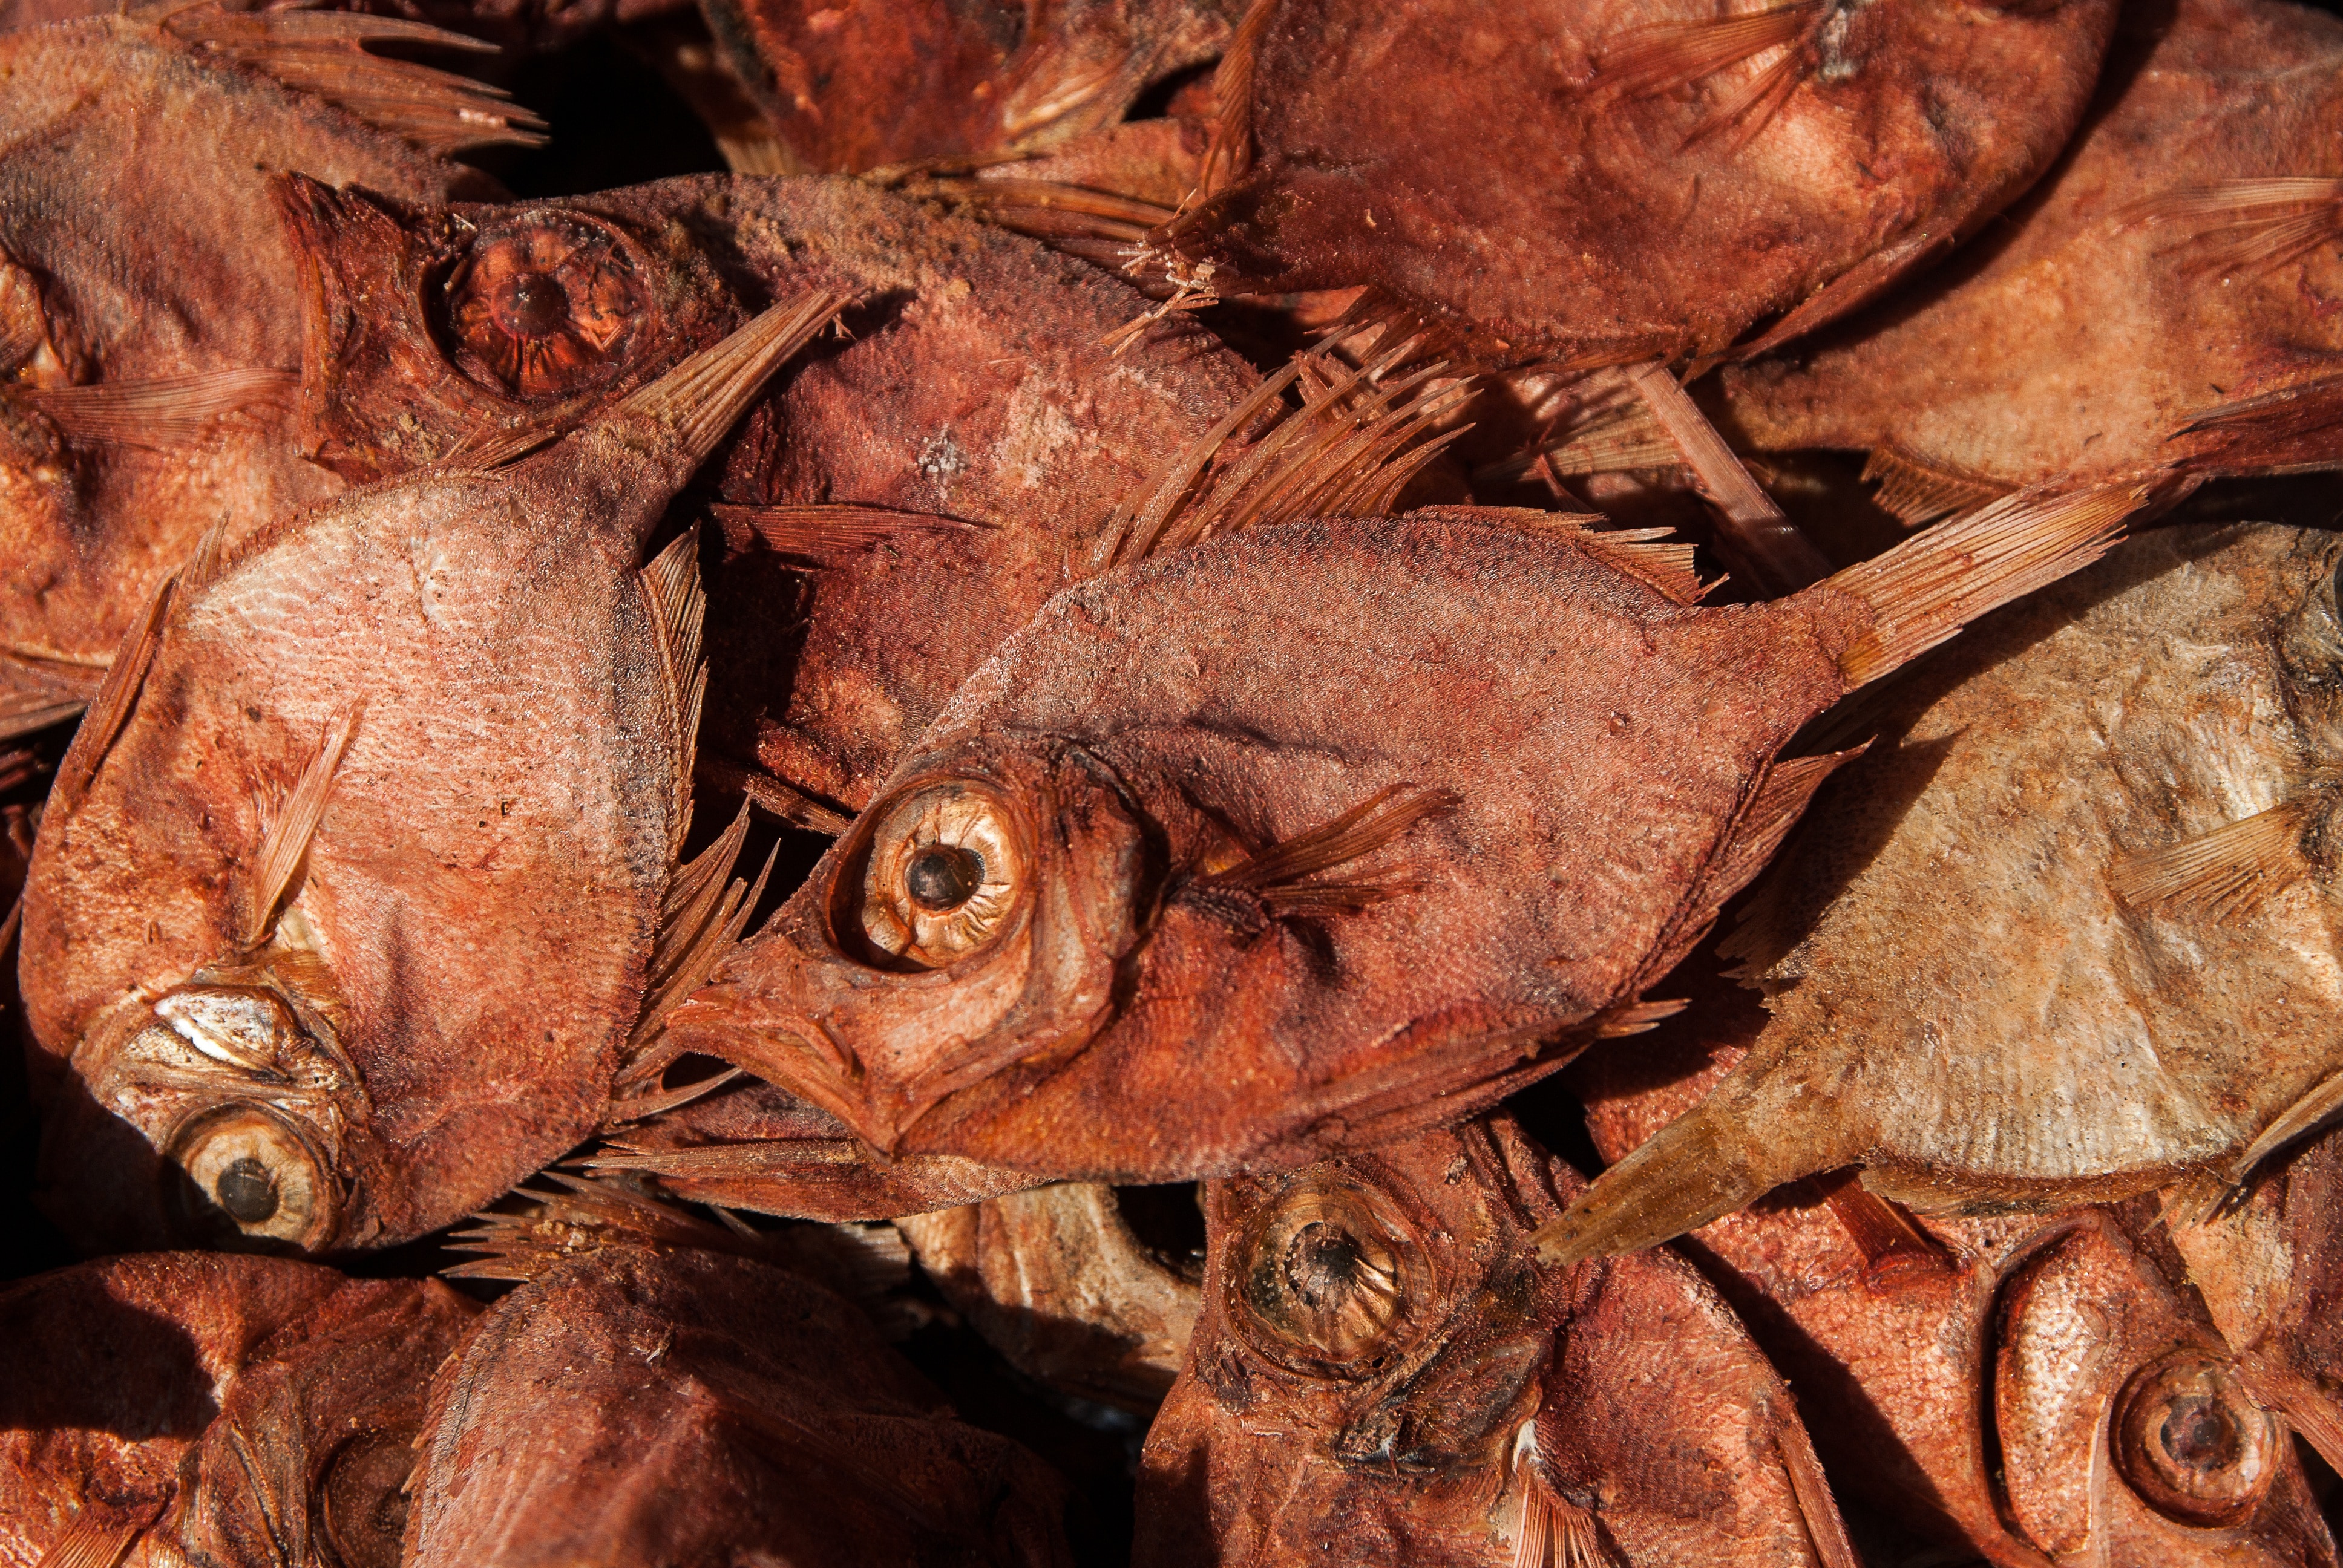 lot of brown dried fish